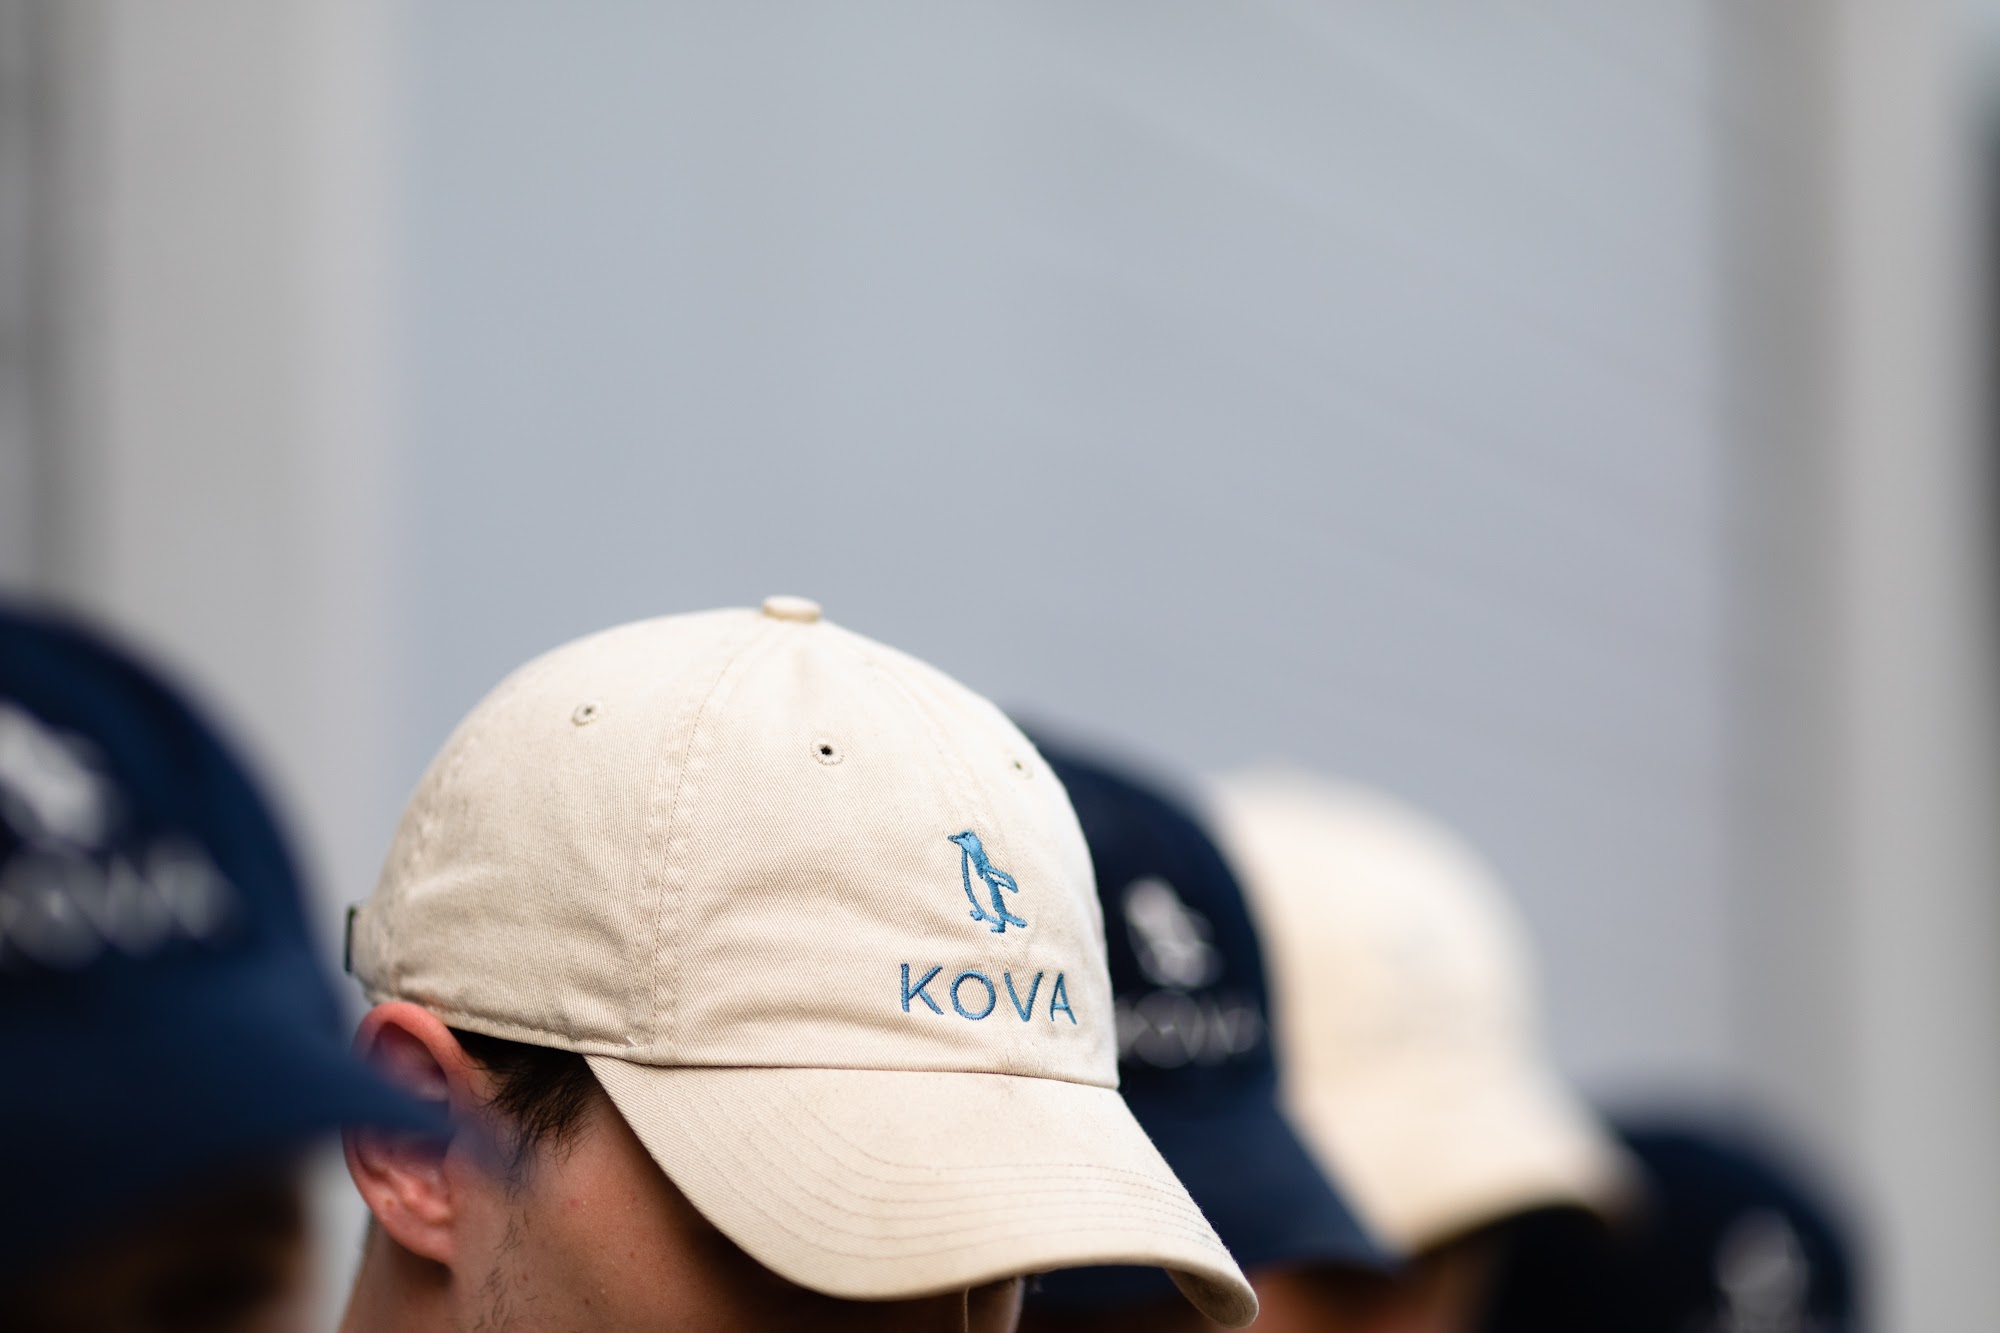 KOVA Heating and Cooling